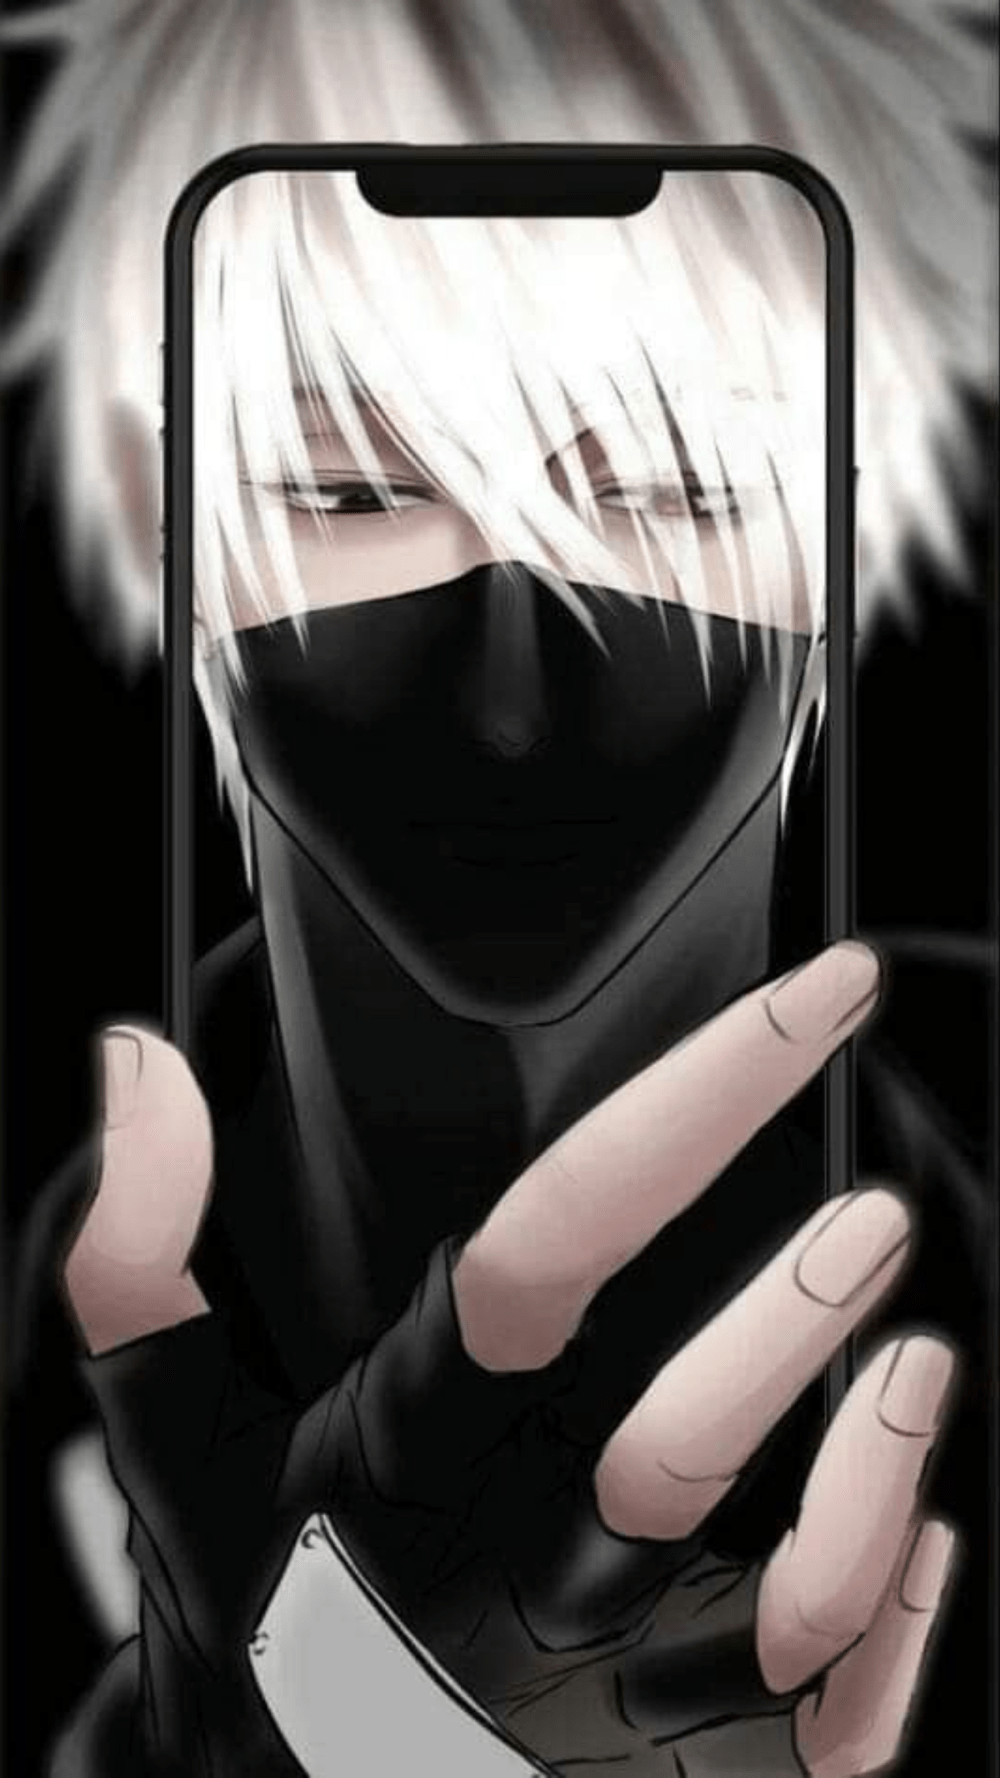 Aesthetic Anime Wallpaper Free Download App for iPhone